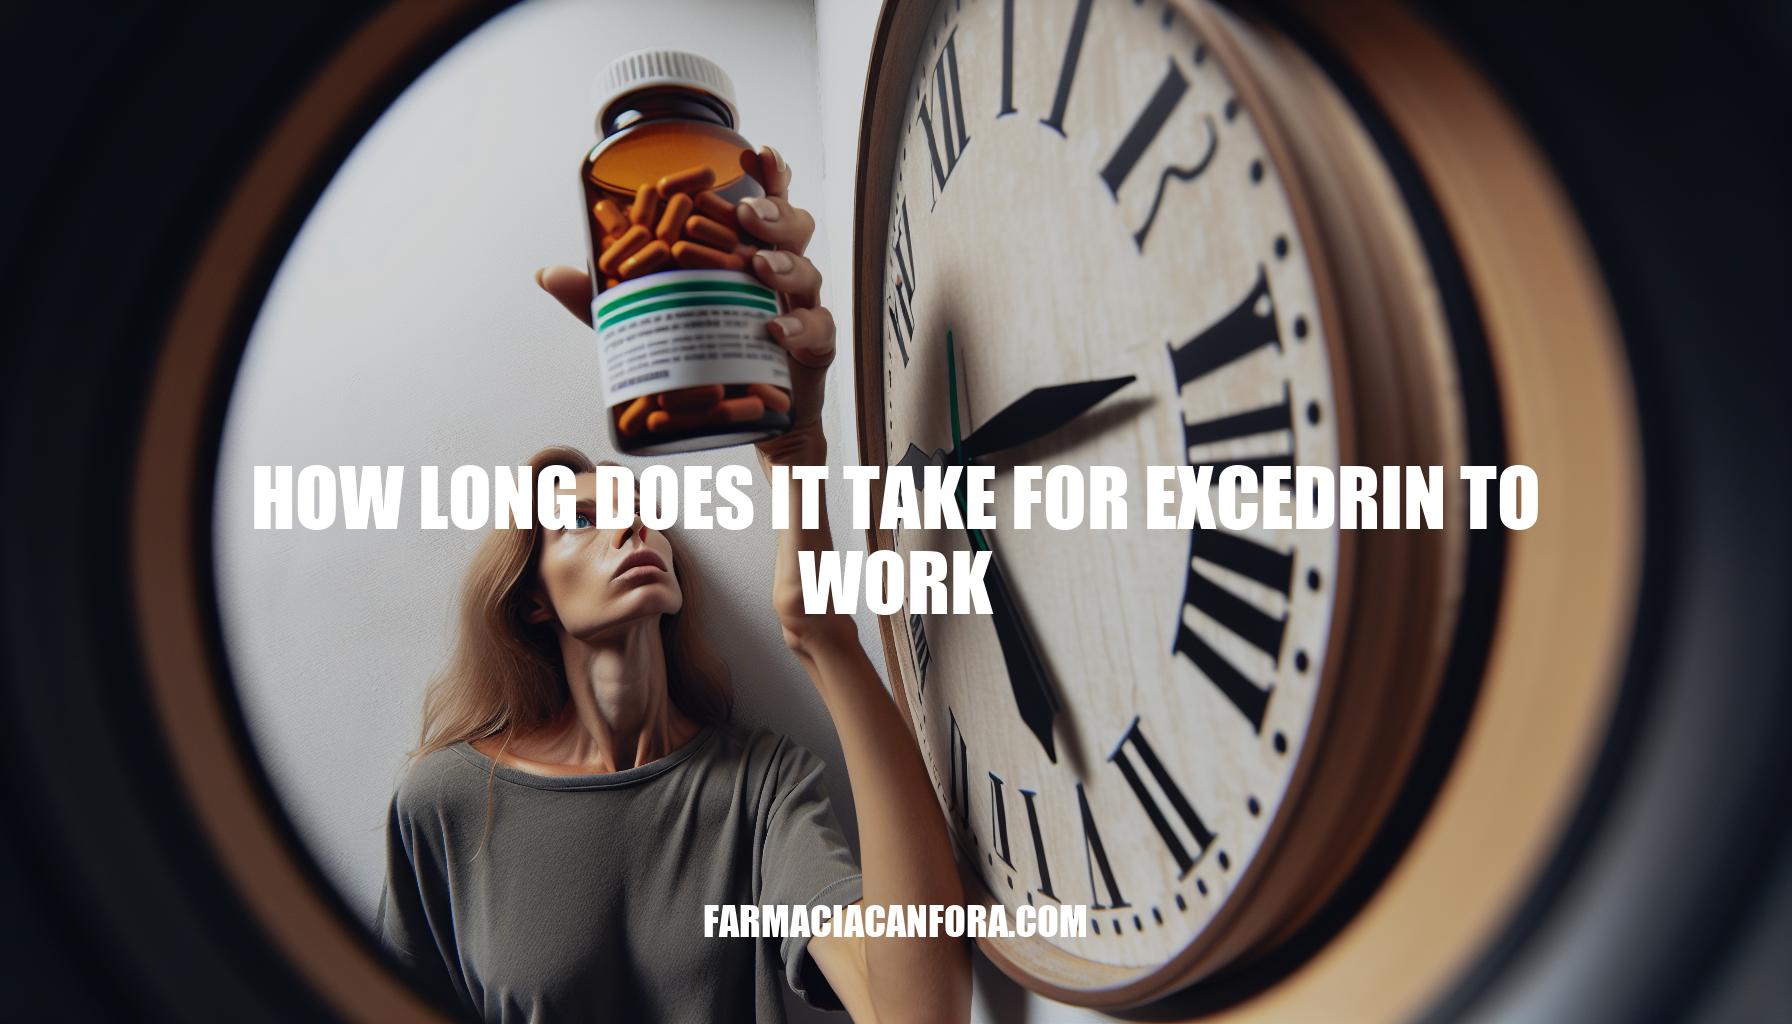 How Long Does It Take for Excedrin to Work